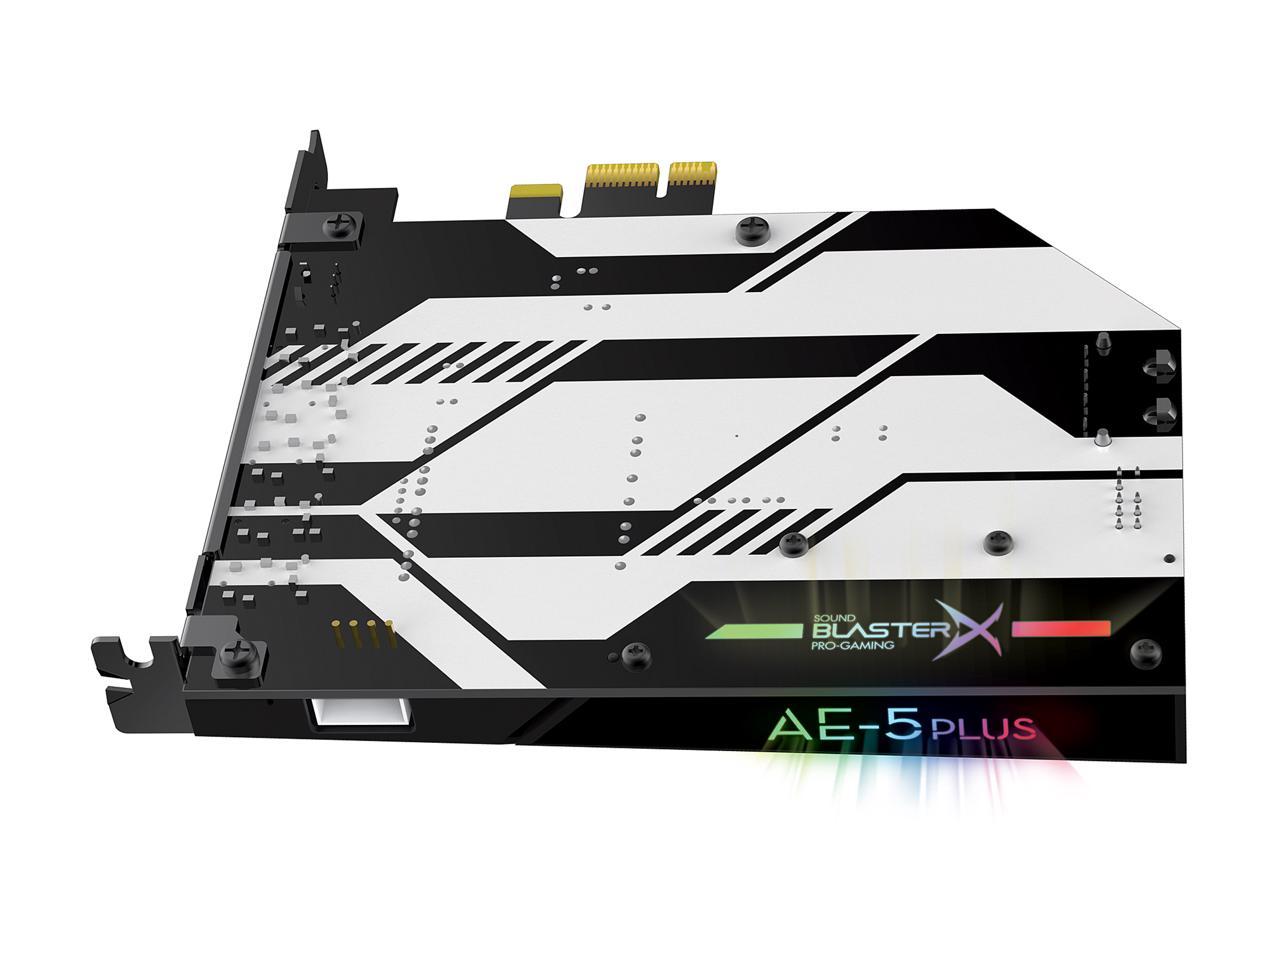 Creative Sound BlasterX AE-5 Plus SABRE32-class Hi-res 32-bit/384 kHz PCIe  Gaming Sound Card and DAC with Dolby Digital and DTS, Xamp Discrete 